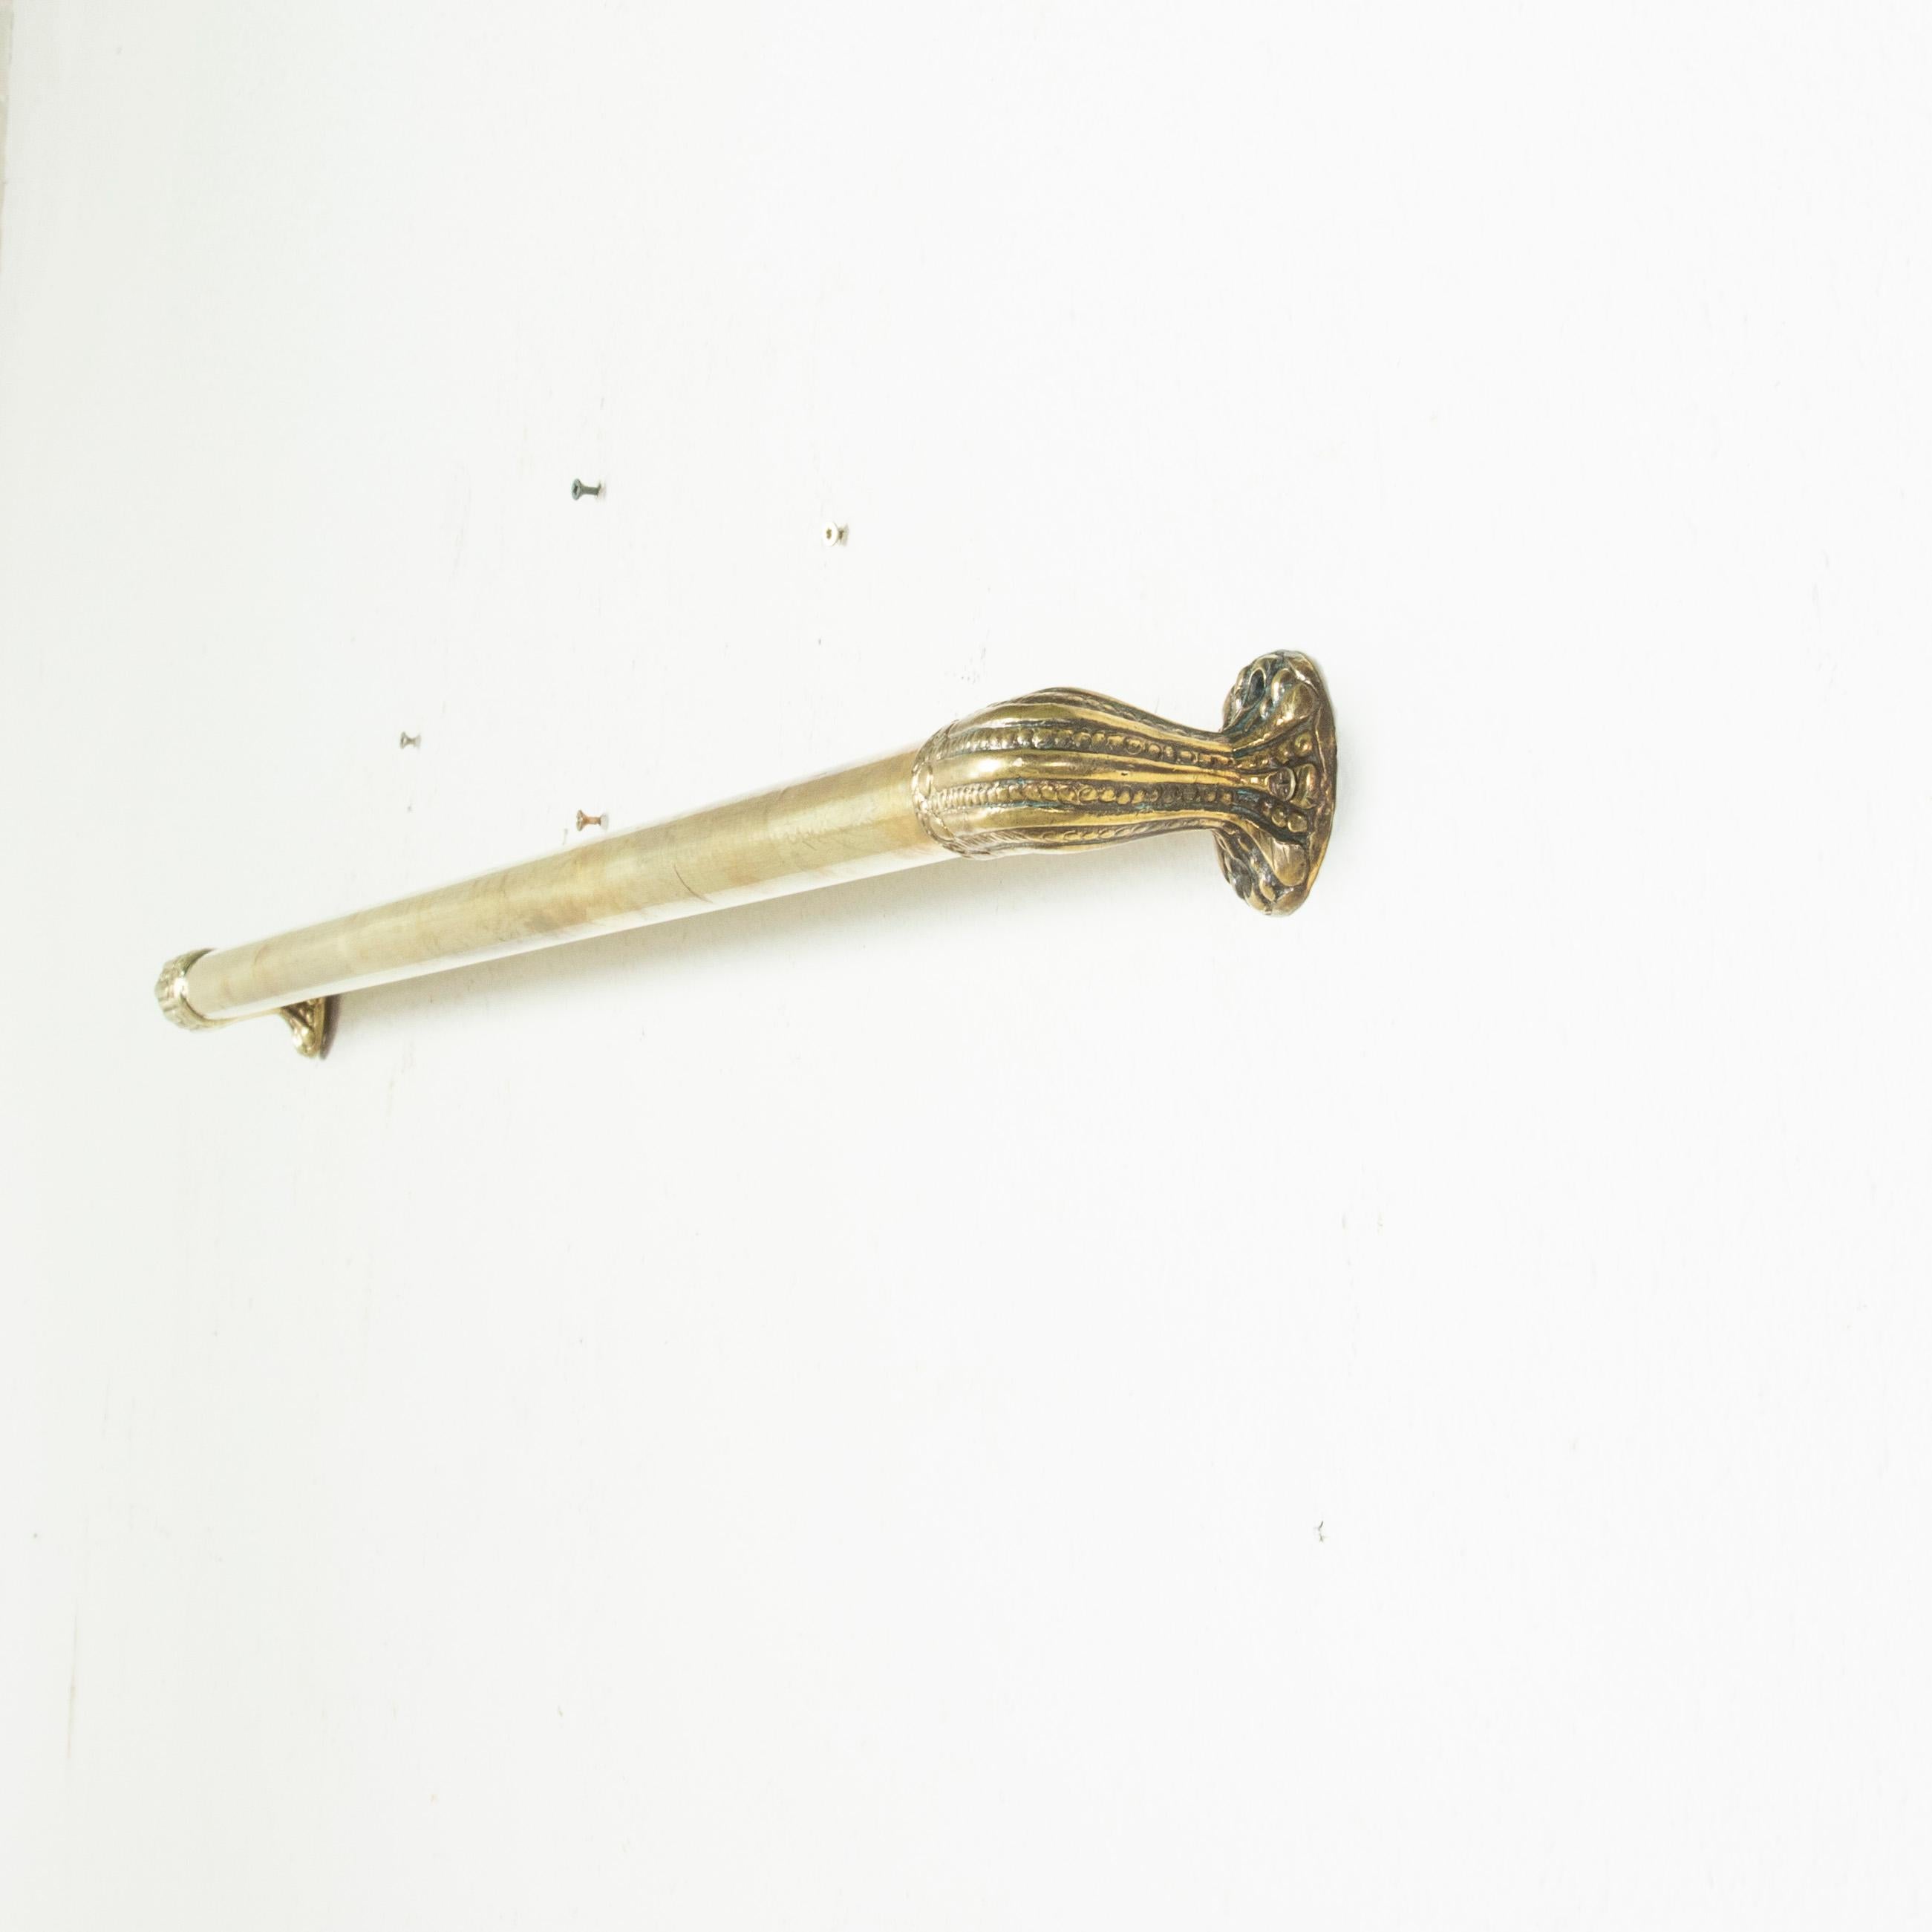 Originally used as a hand rail with its 47 inch length, this French Art Nouveau period brass bar from the turn of the 20th century features Inverted fluting alternated with beading at each end. An elegant piece, ideal for use as a towel bar or